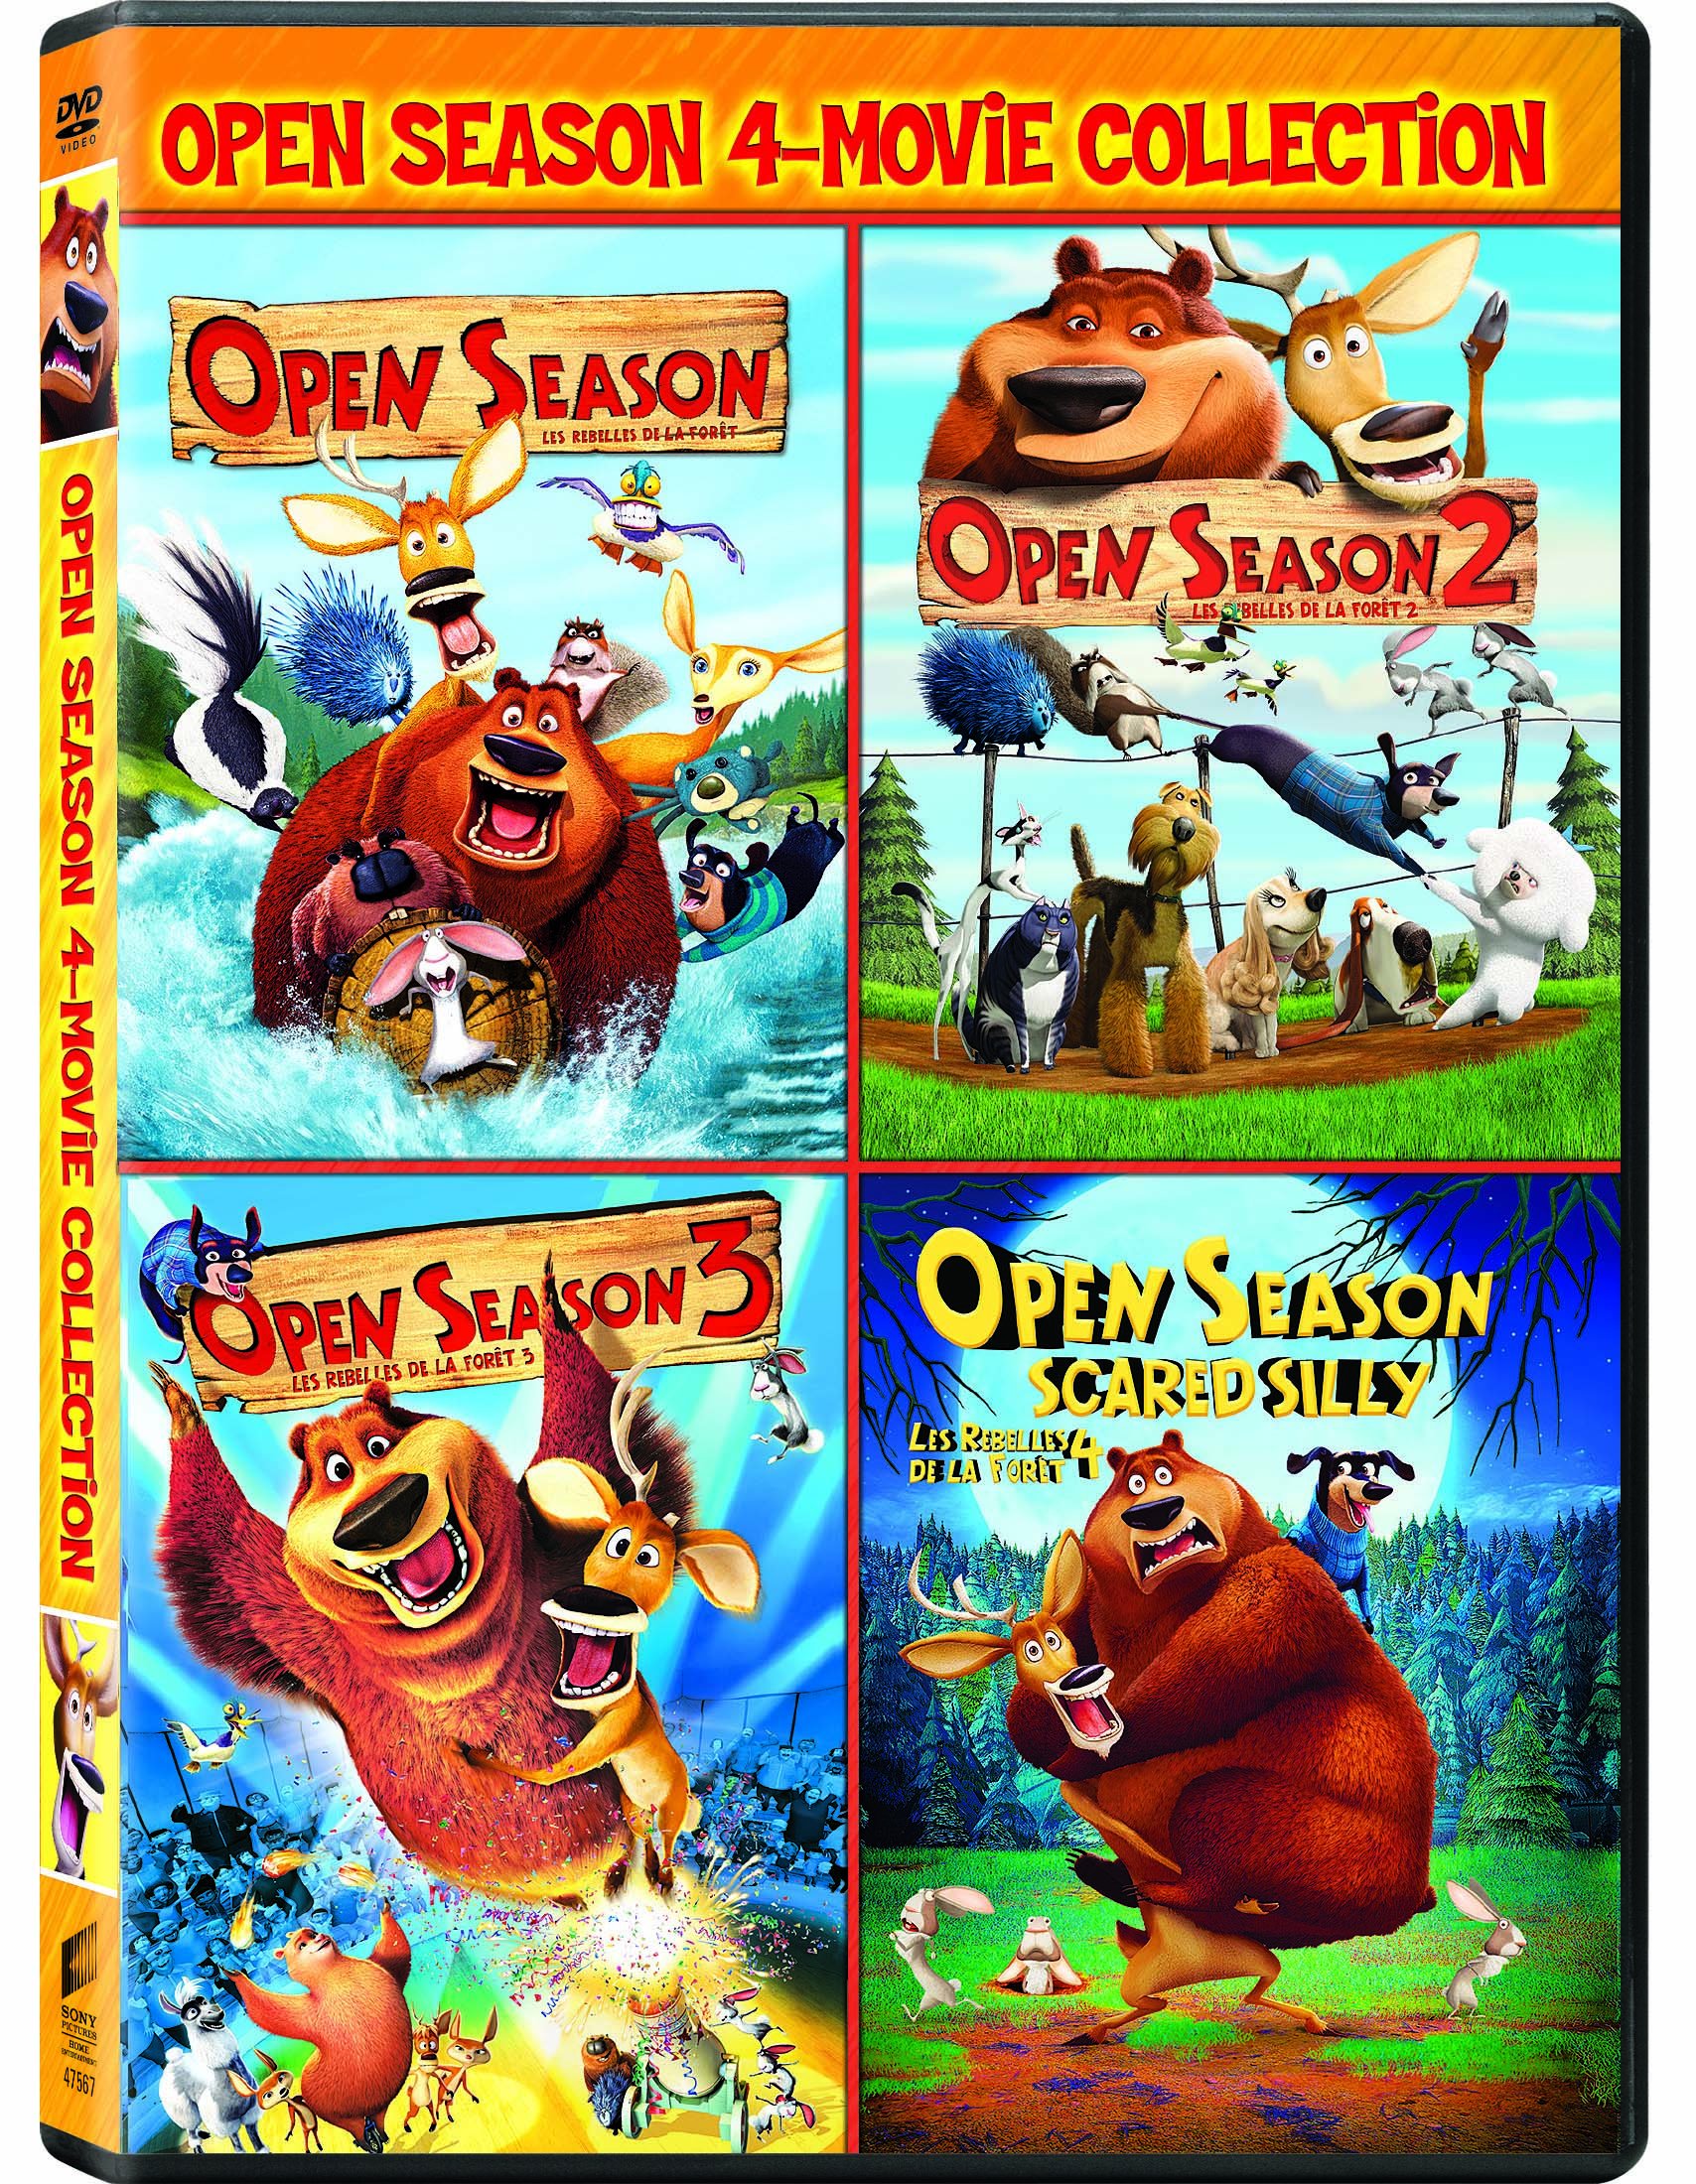 Open Season (2006) / Open Season 2 / Open Season 3 / Open Season: Scared Silly (Bilingual)